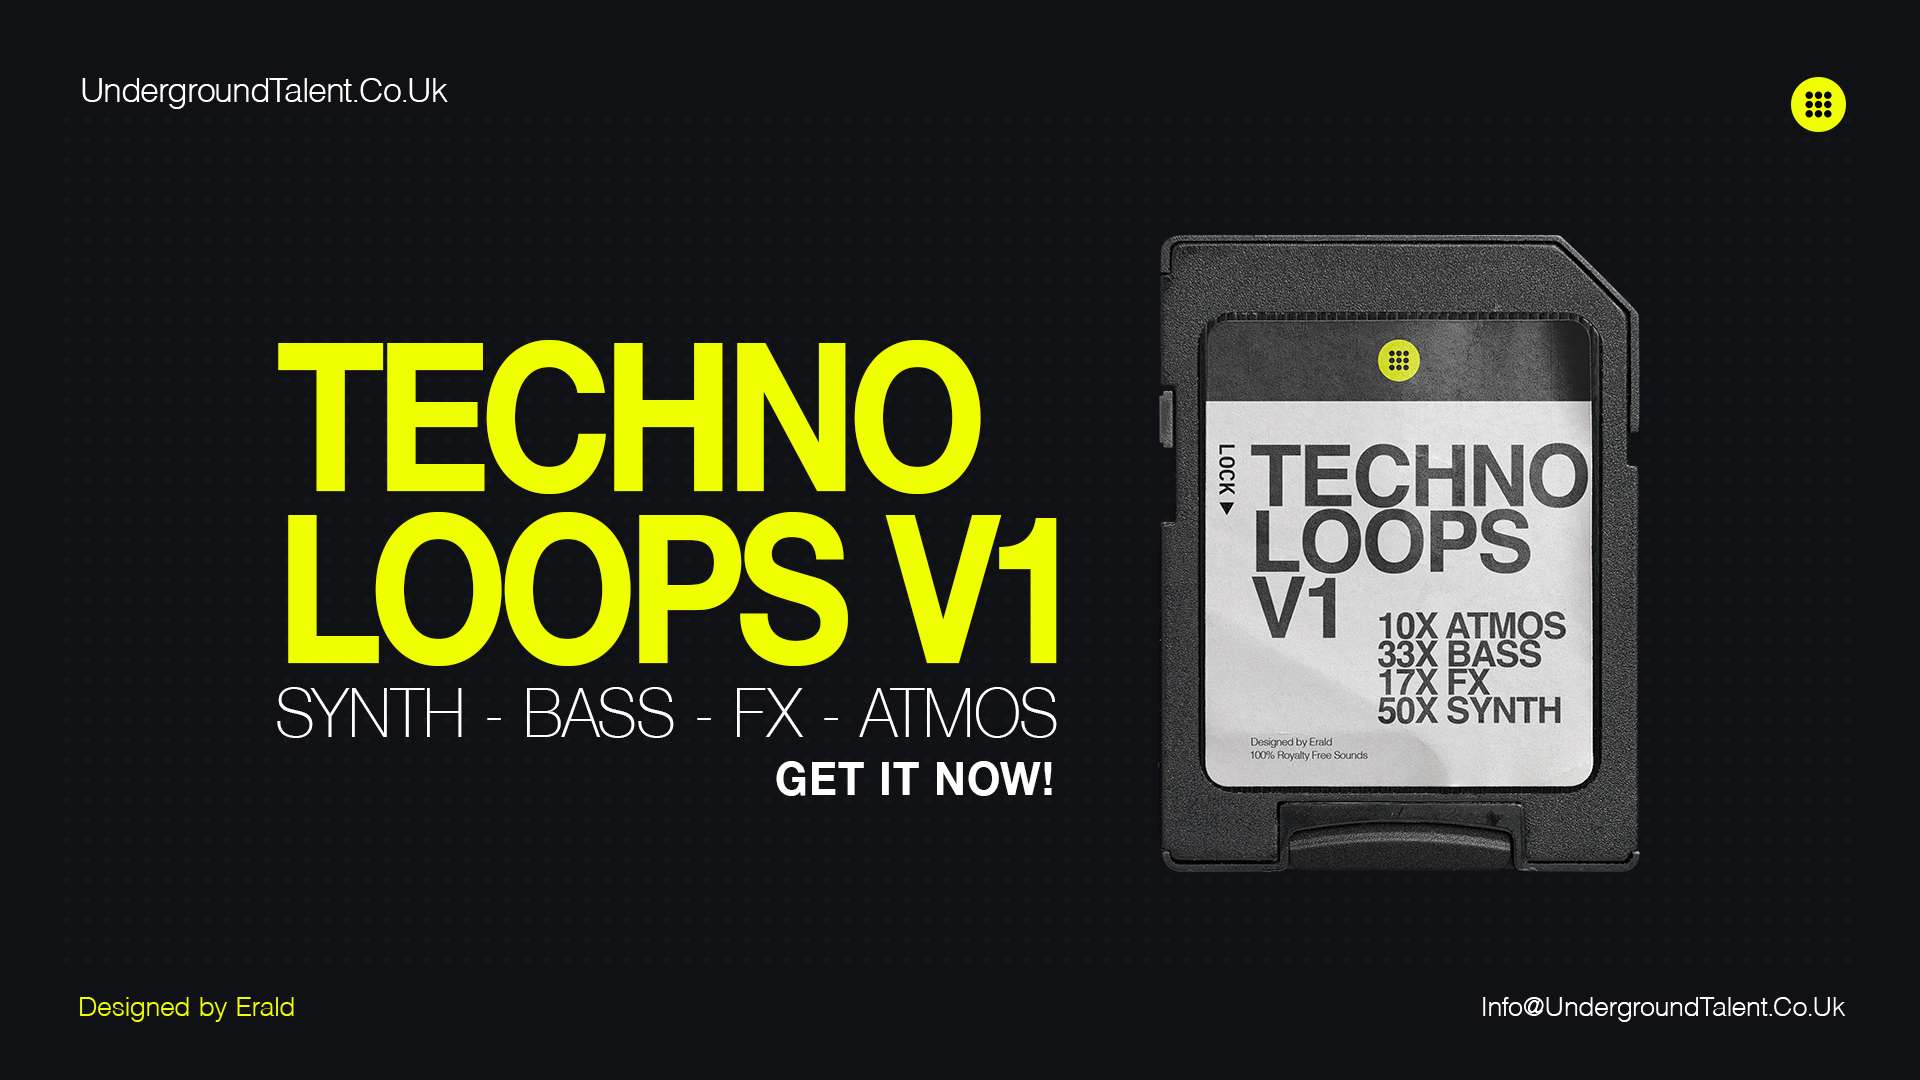 Techno Loops V1: High-Quality Analog Loops for Music Production